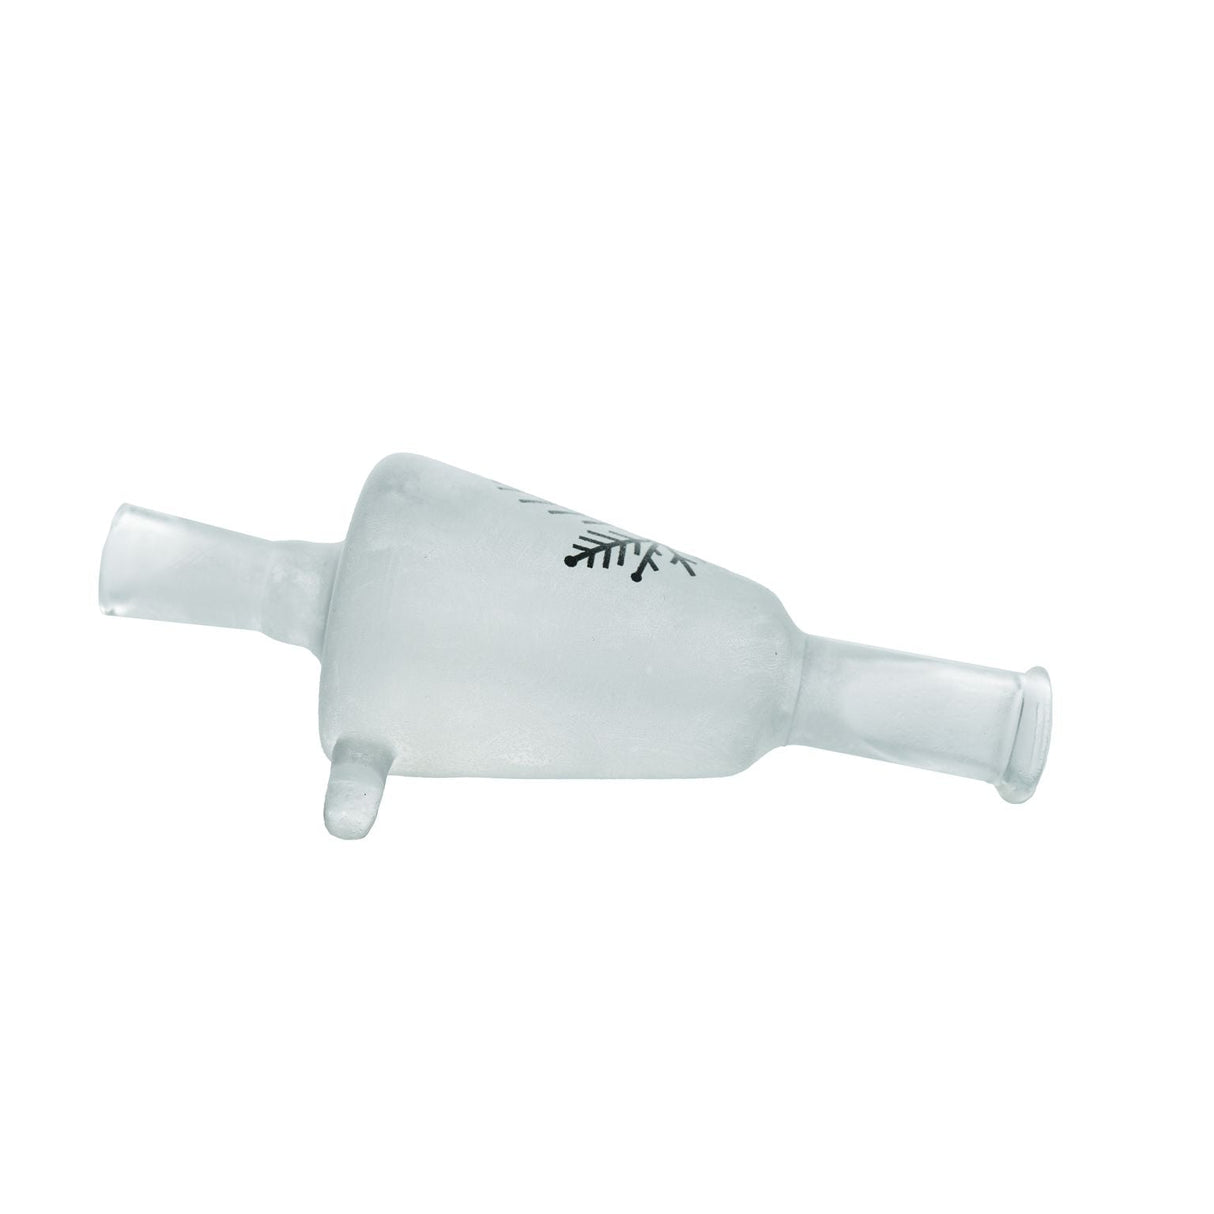 Freeze Pipe Glycerin Blunt Tip angled view on seamless white background, frosted glass finish